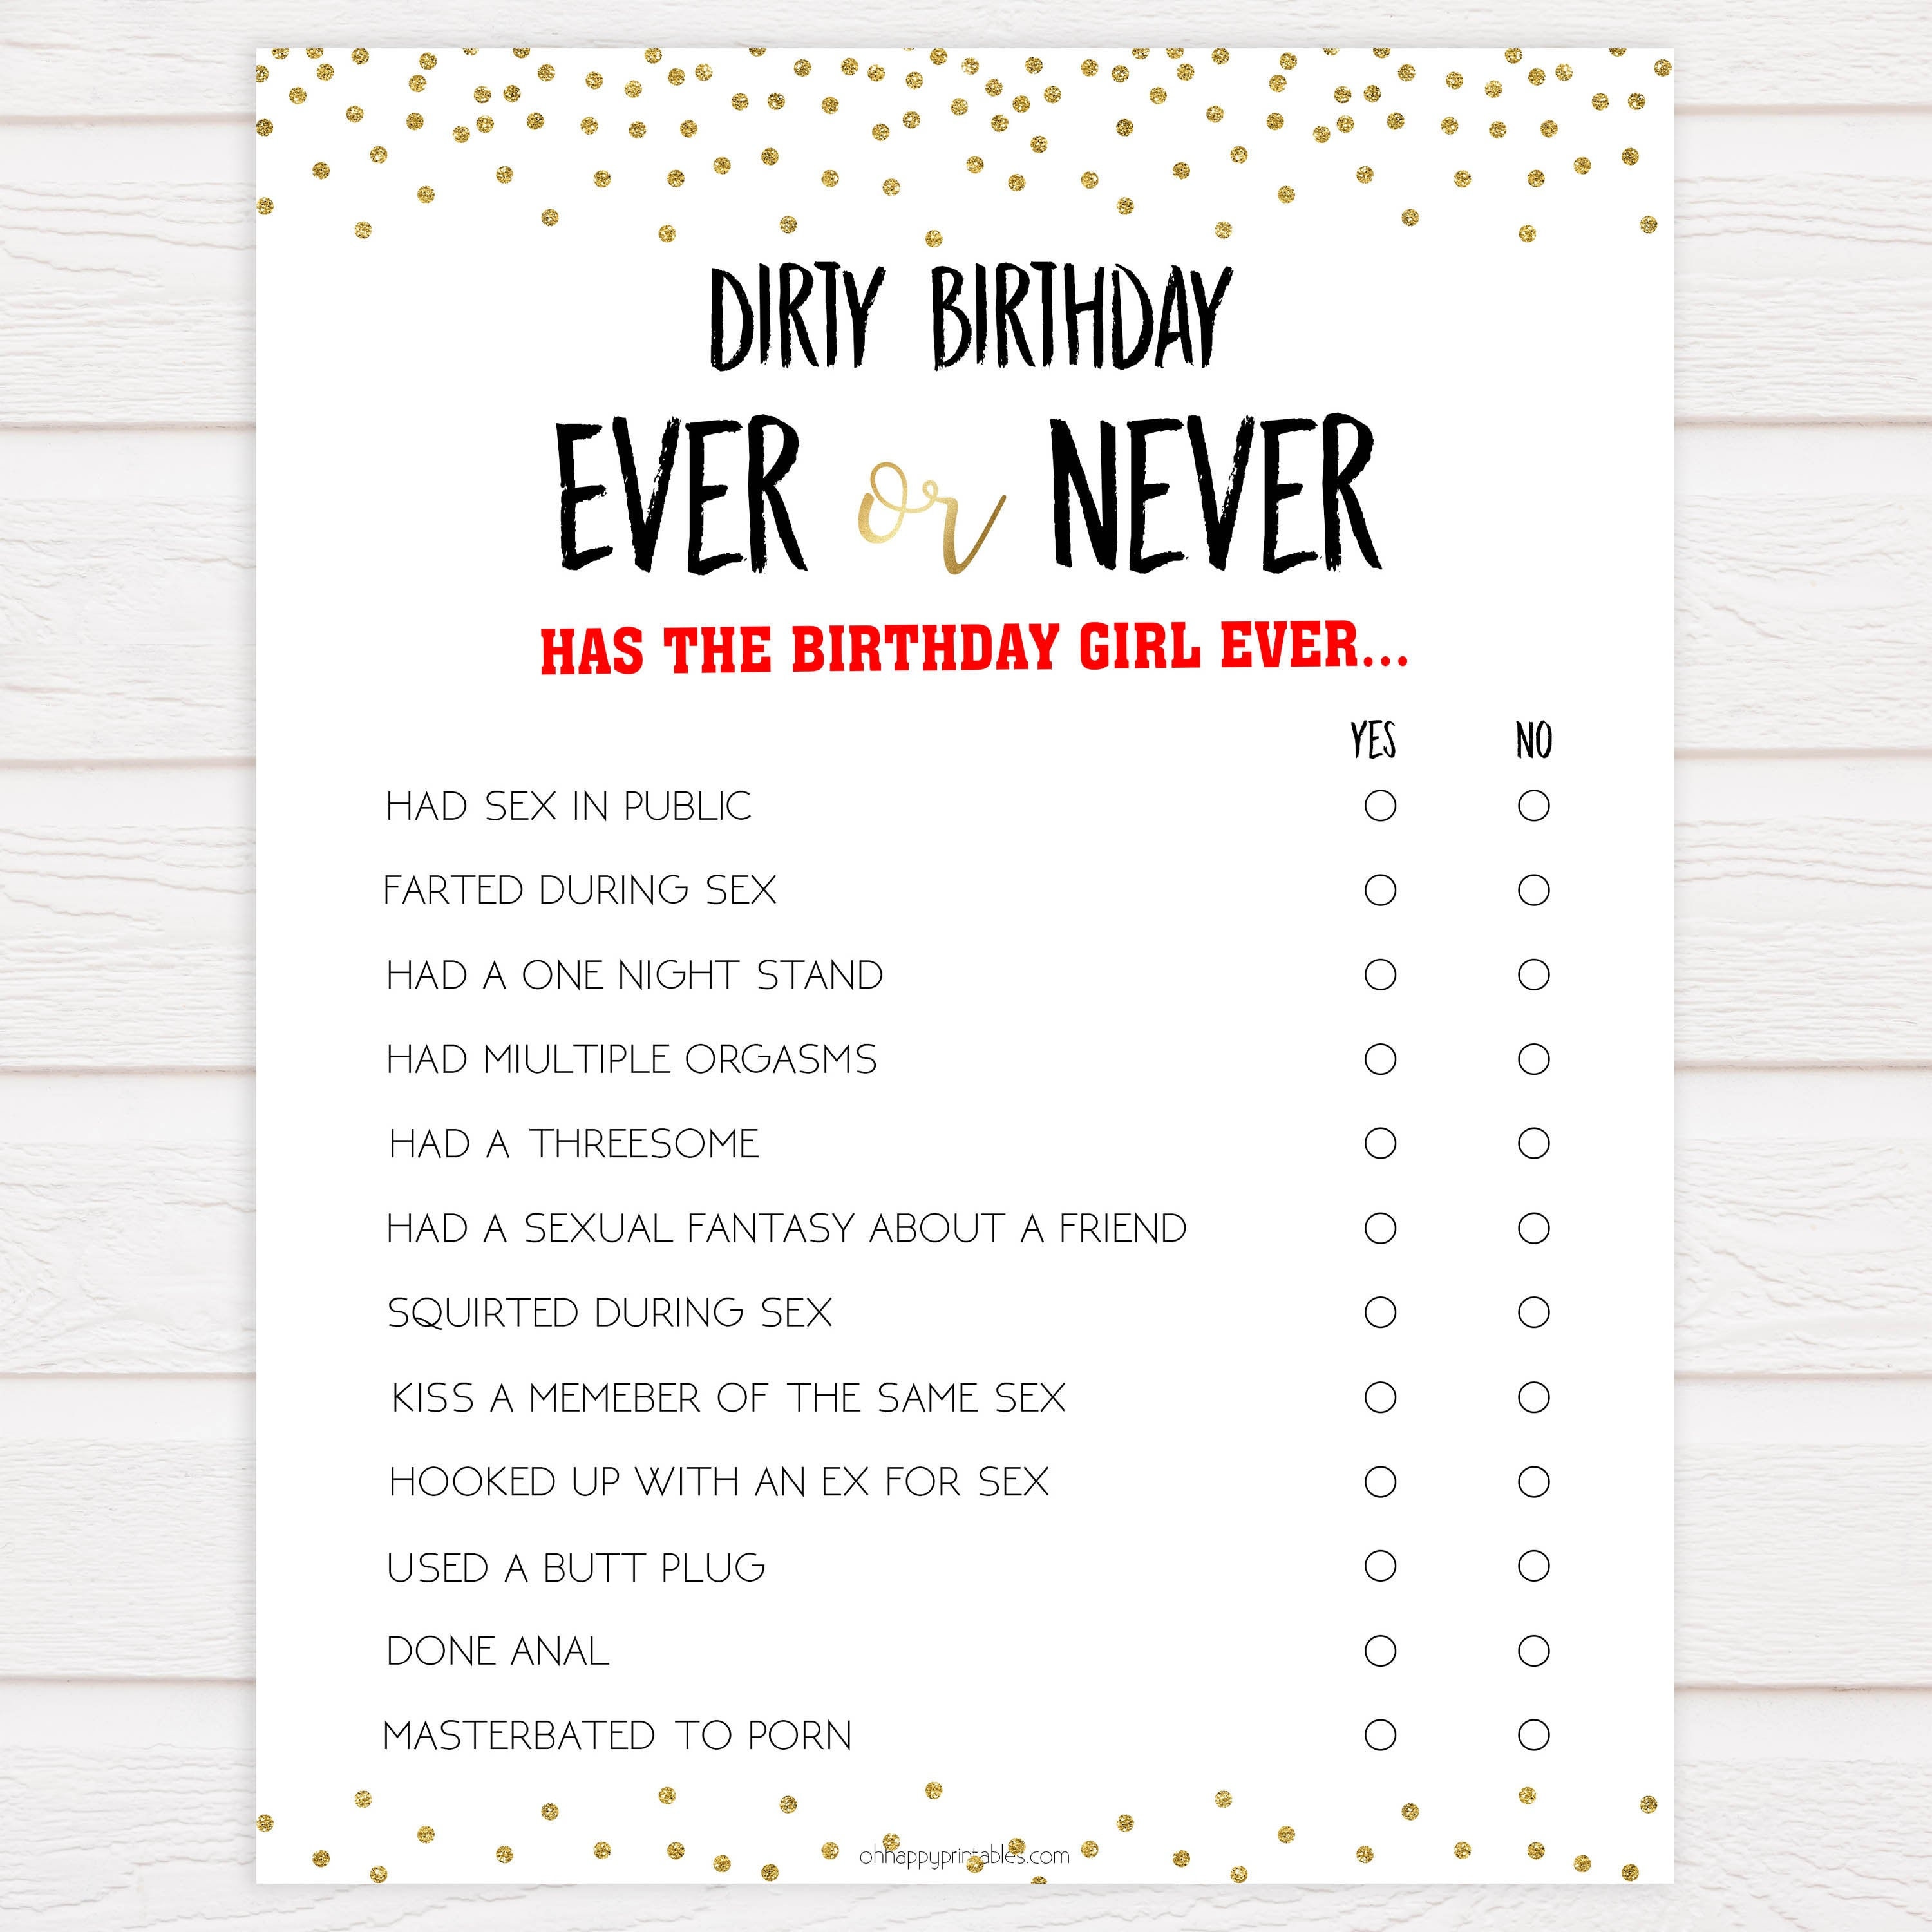 Buy DIRTY Birthday Ever or Never Game Gold Have I Ever Birthday Online in  India - Etsy